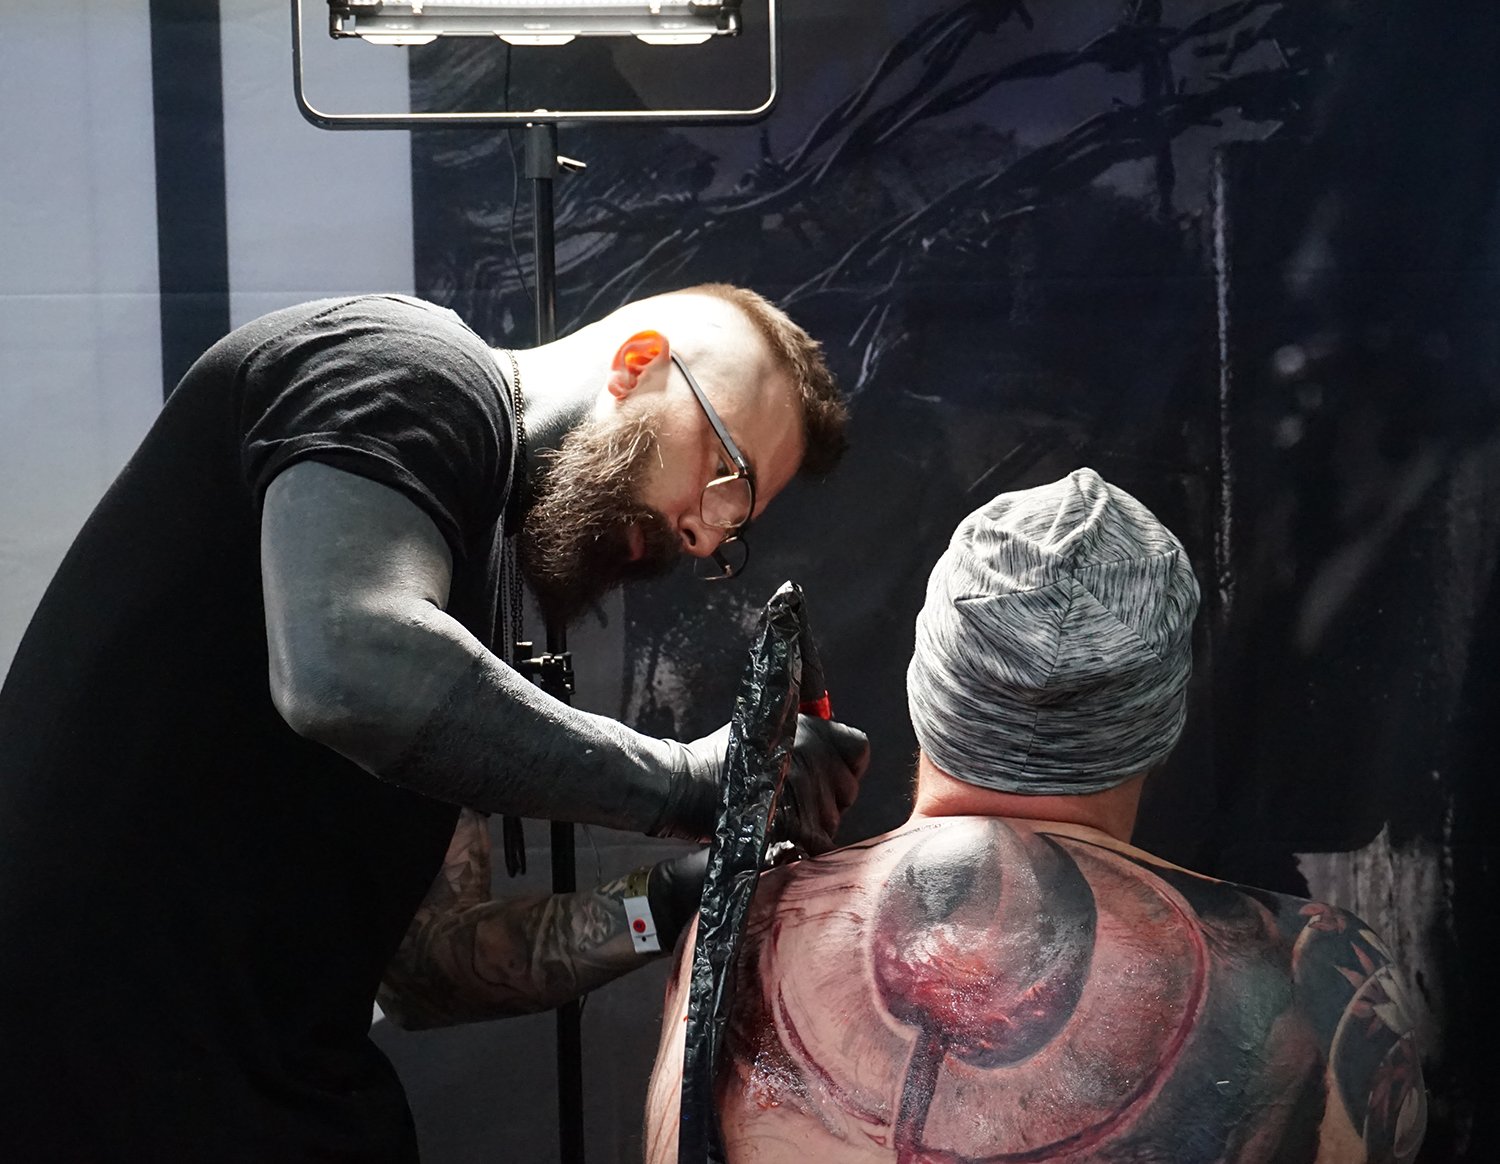 kamil mocet tattooing back piece at event